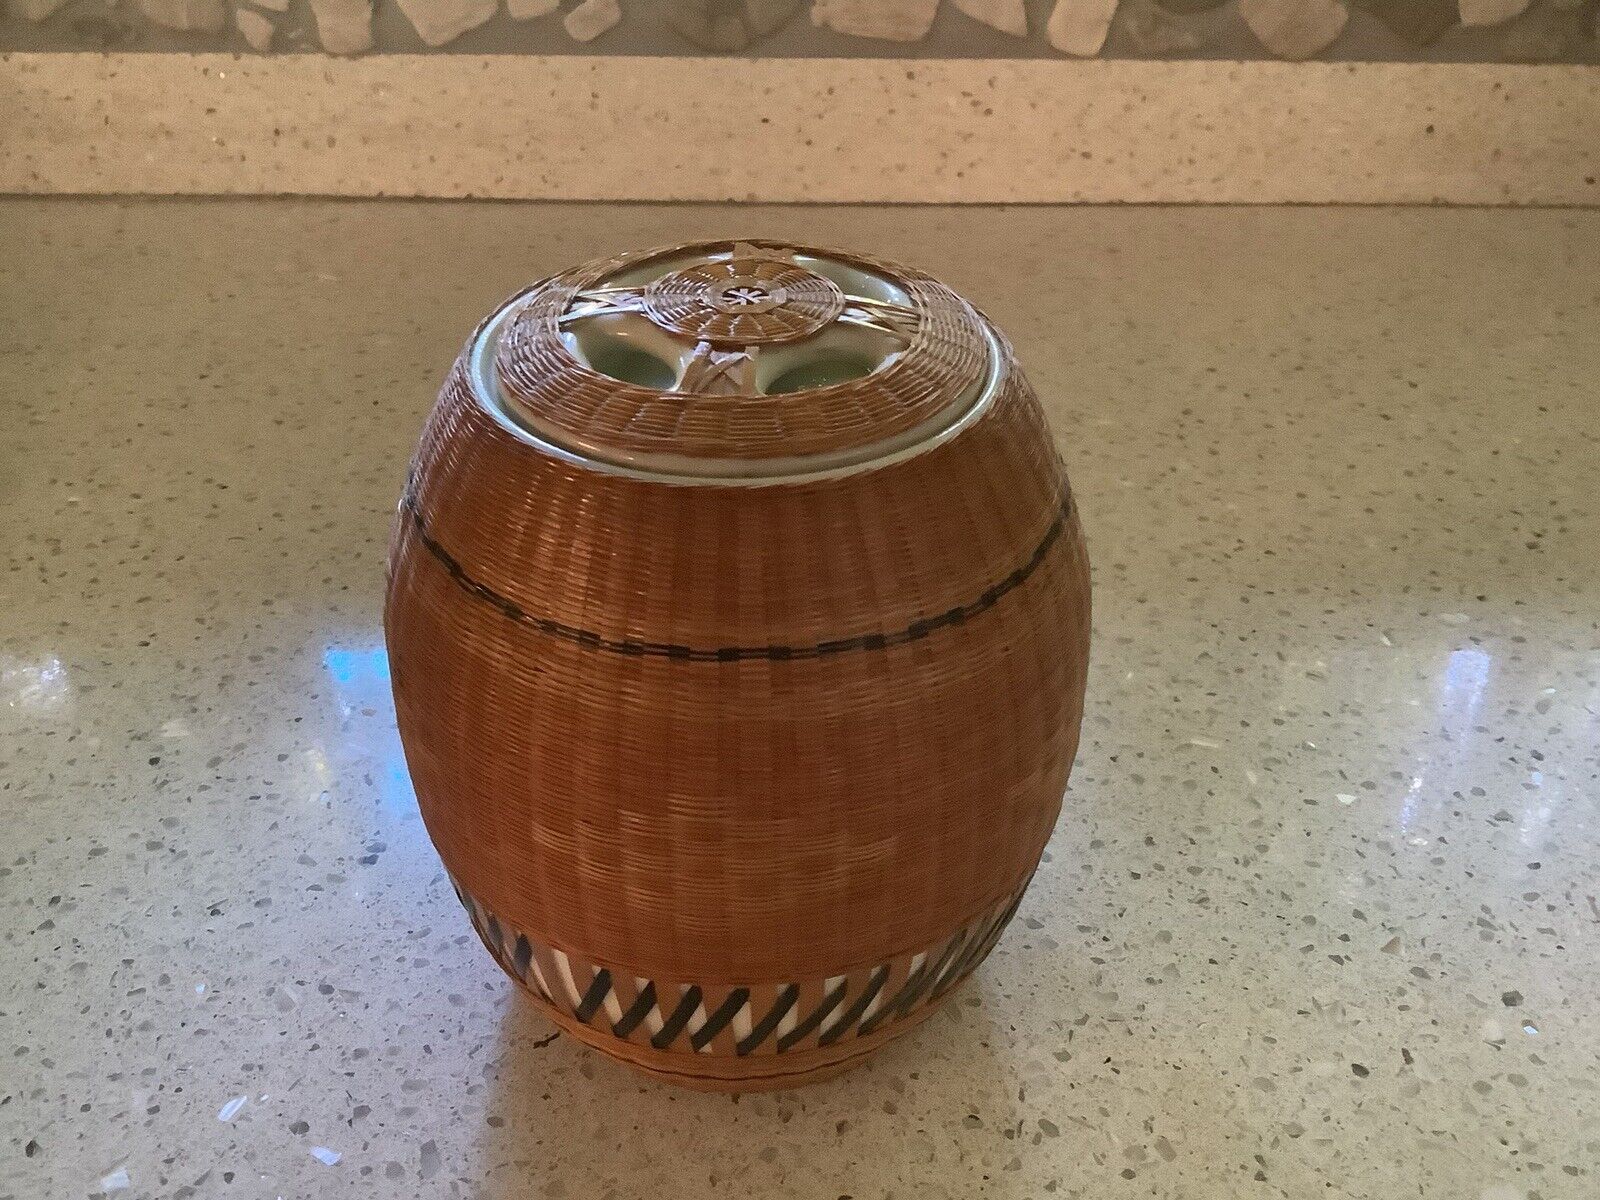 Vintage Asian Woven Wicker/ Bamboo Encased Ceramic Jar W/Lid, Handcrafted, China